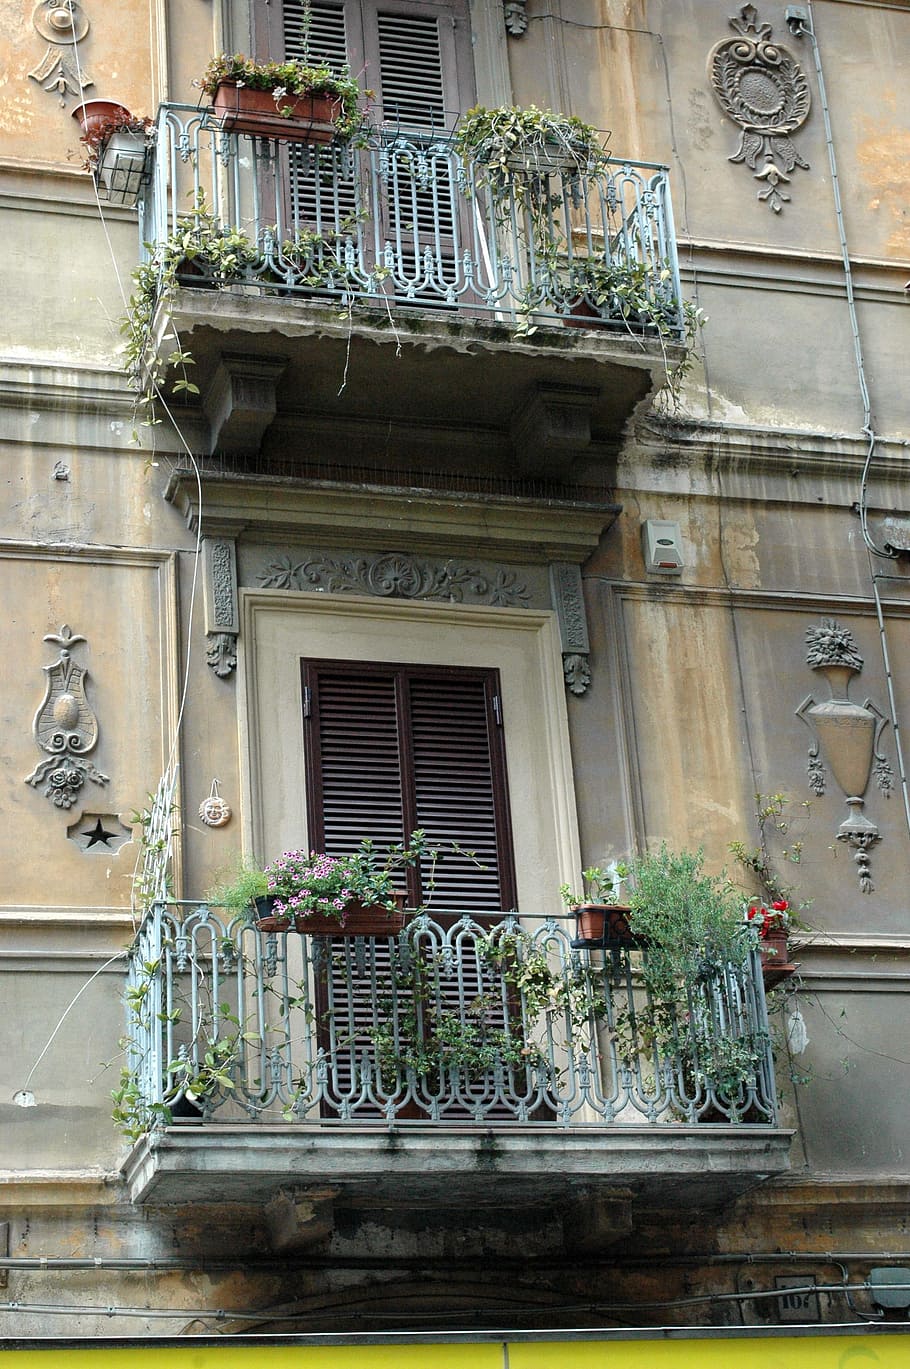 Italy, City, Balcony, Flowers, Street, old house, architecture, building exterior, built structure, ornate